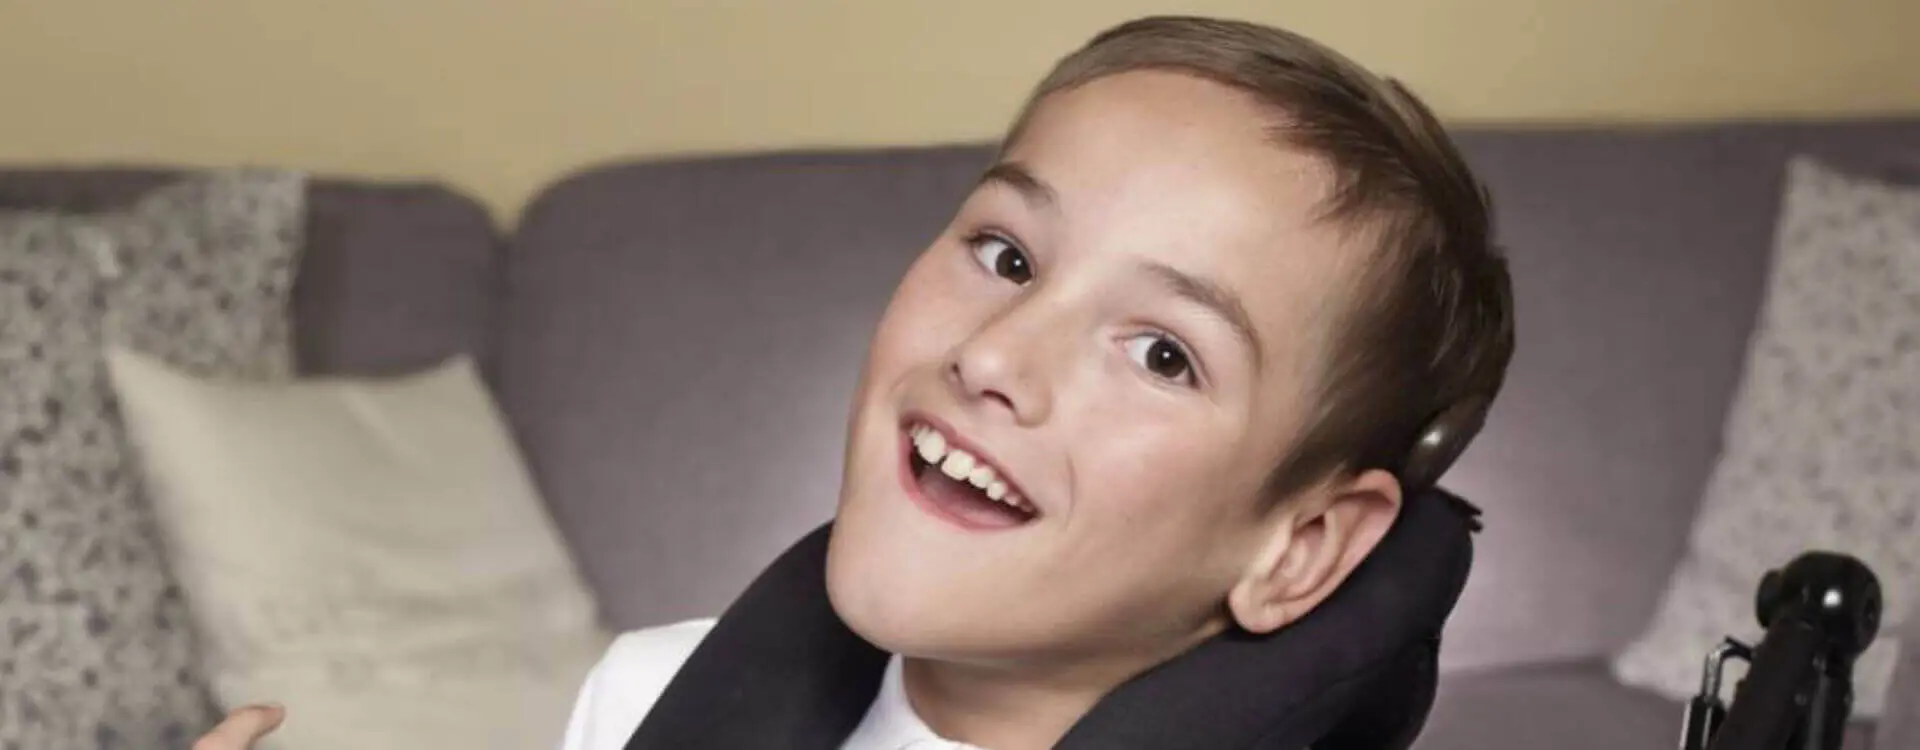 Disabled young boy in wheelchair smiling and happily looking at camera in his living room